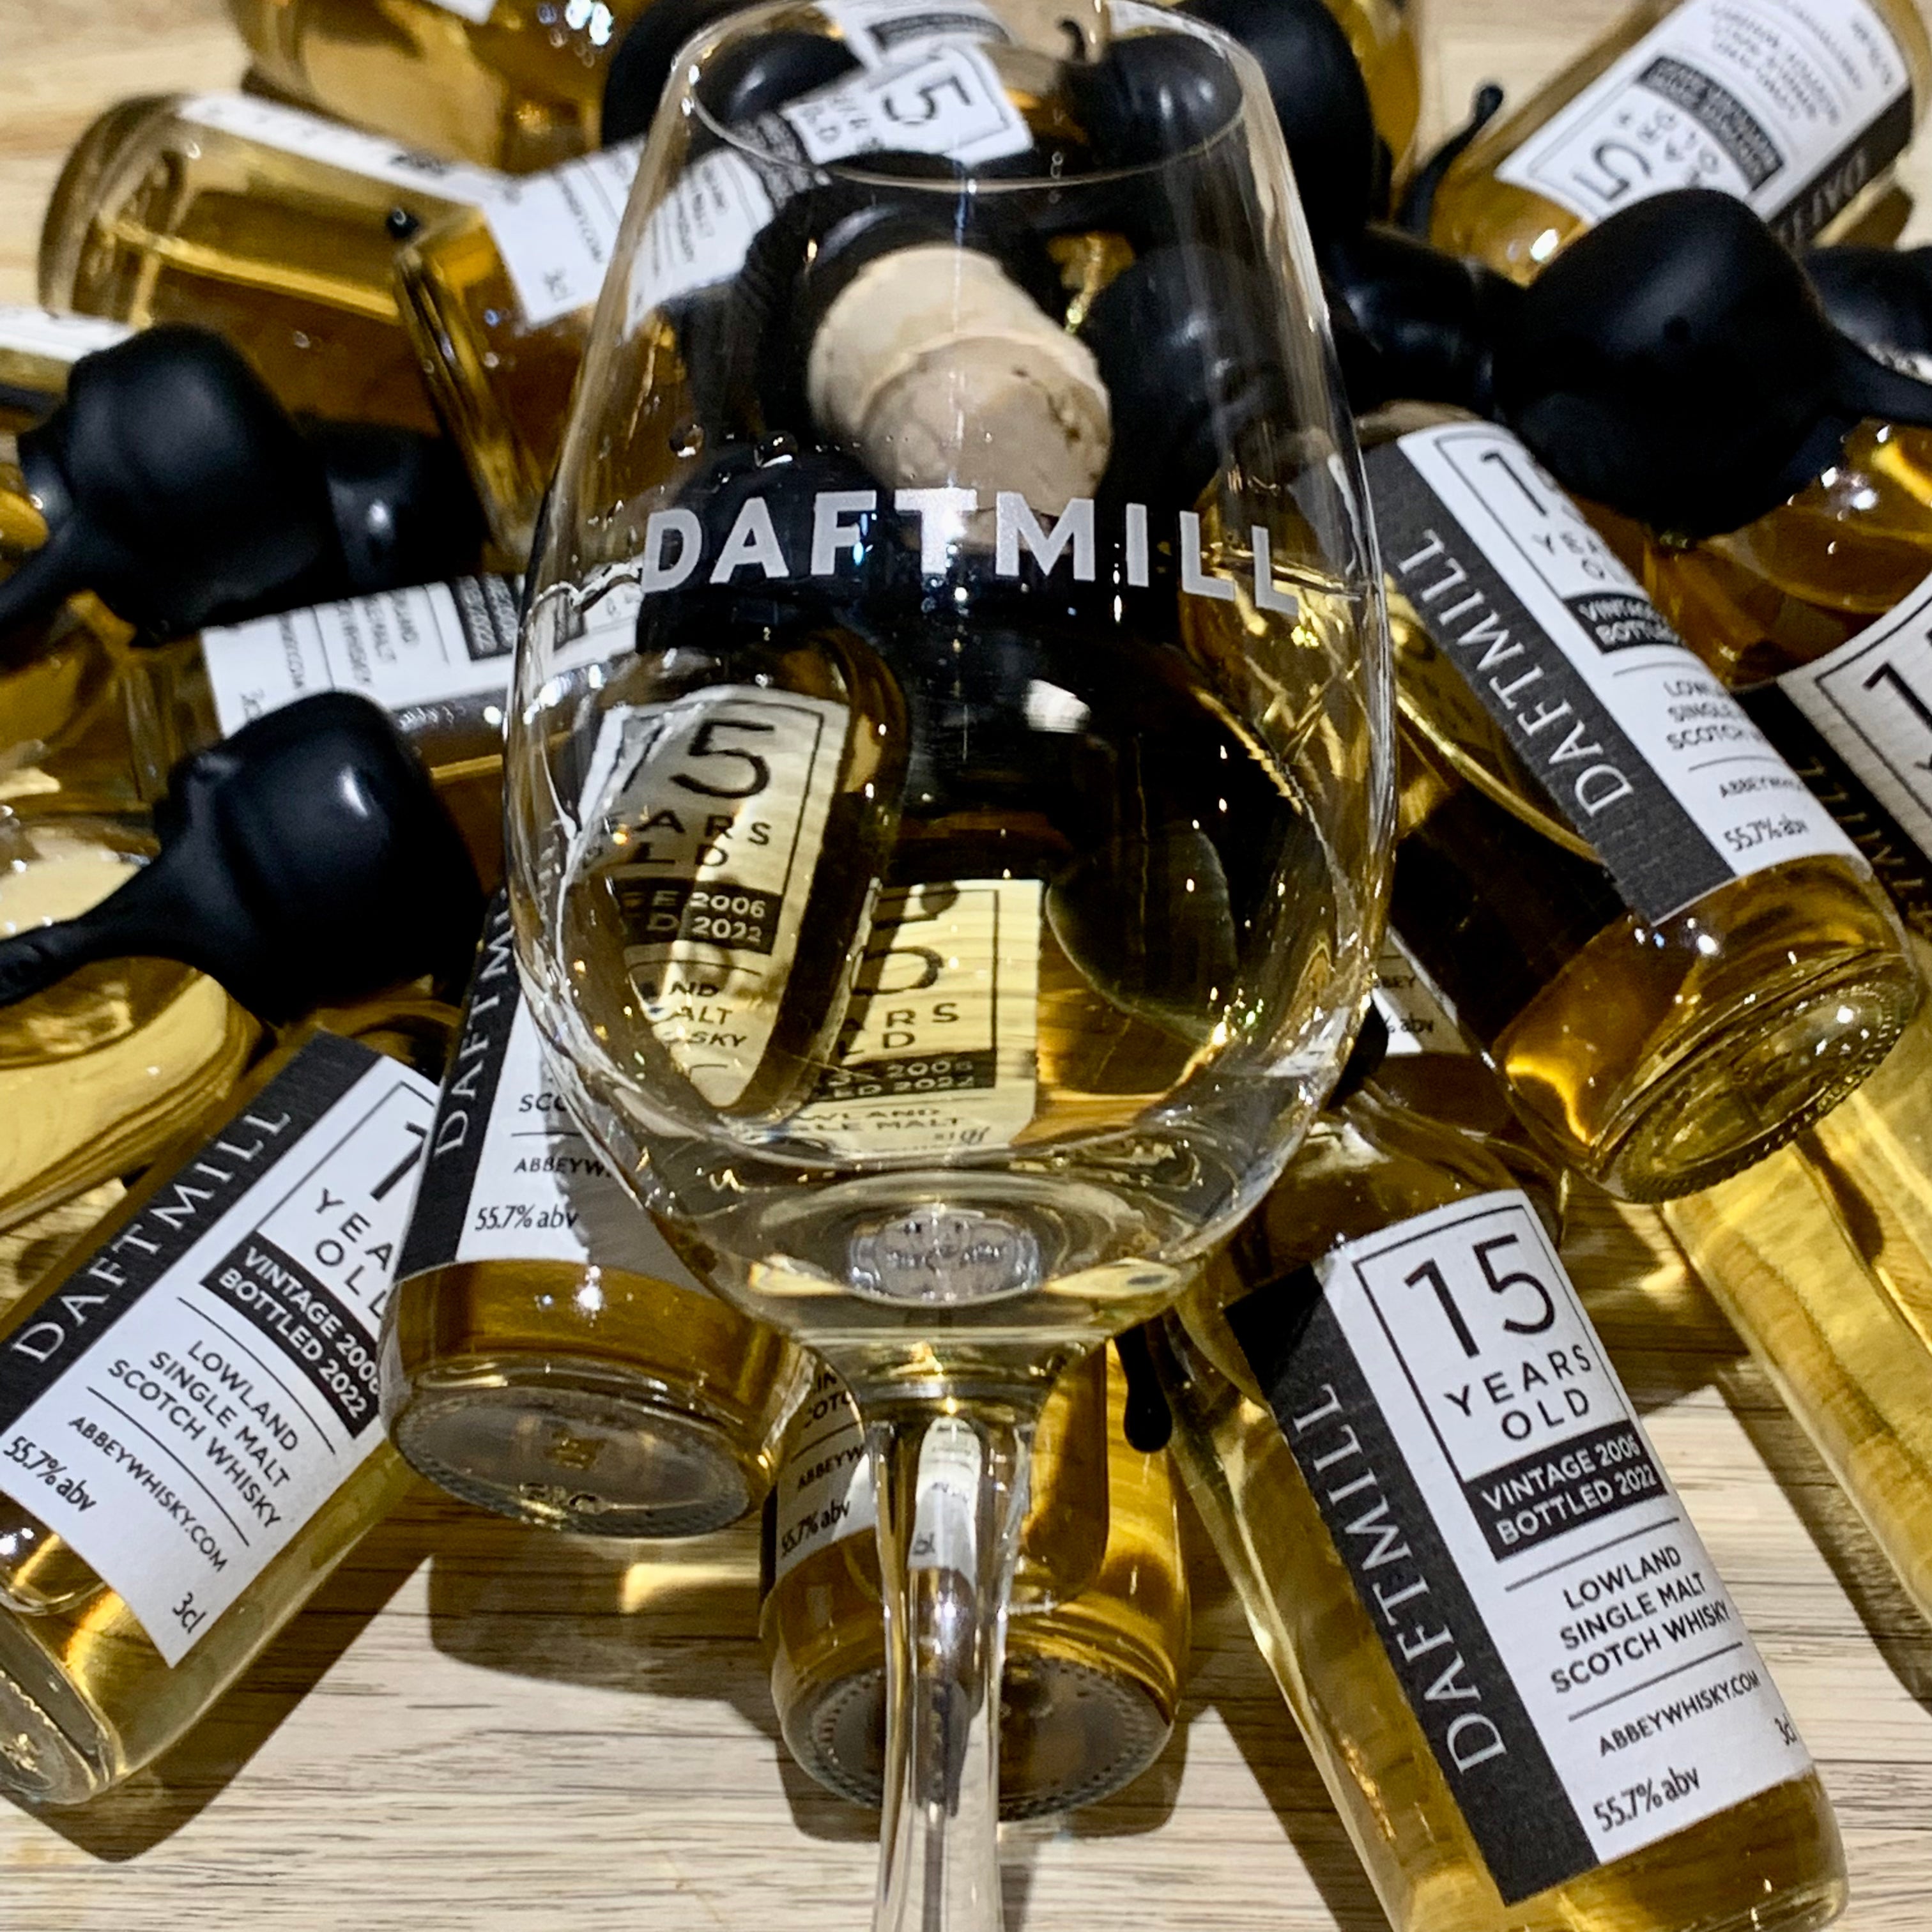 Daftmill 15 Year Old Cask Strength - 3cl Sample